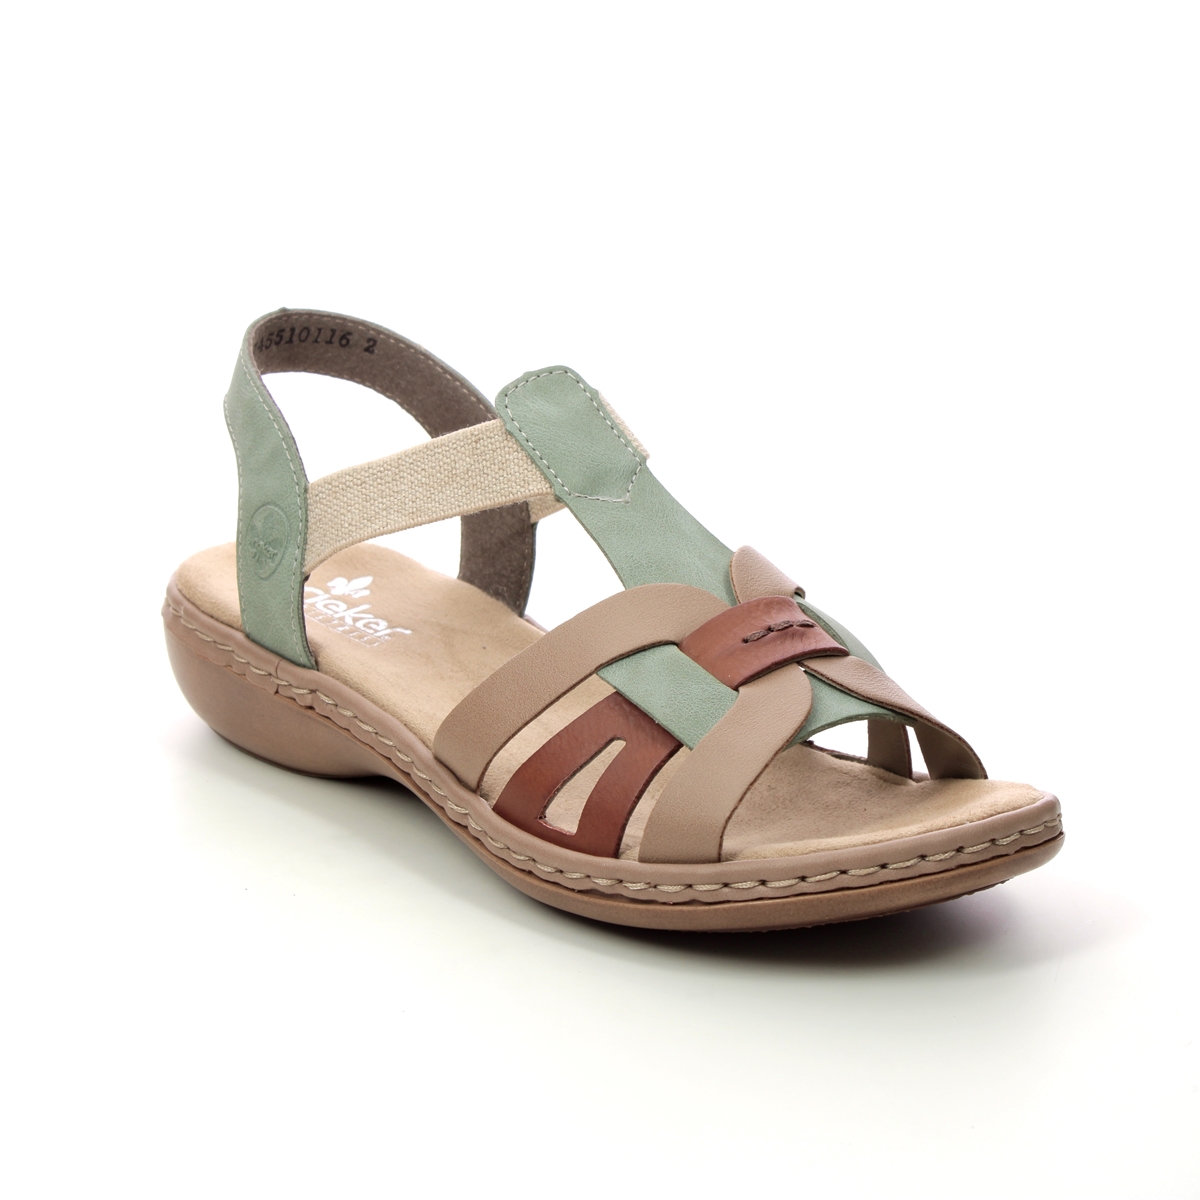 Rieker 65918-52 Green Womens Comfortable Sandals in a Plain Leather in Size 37